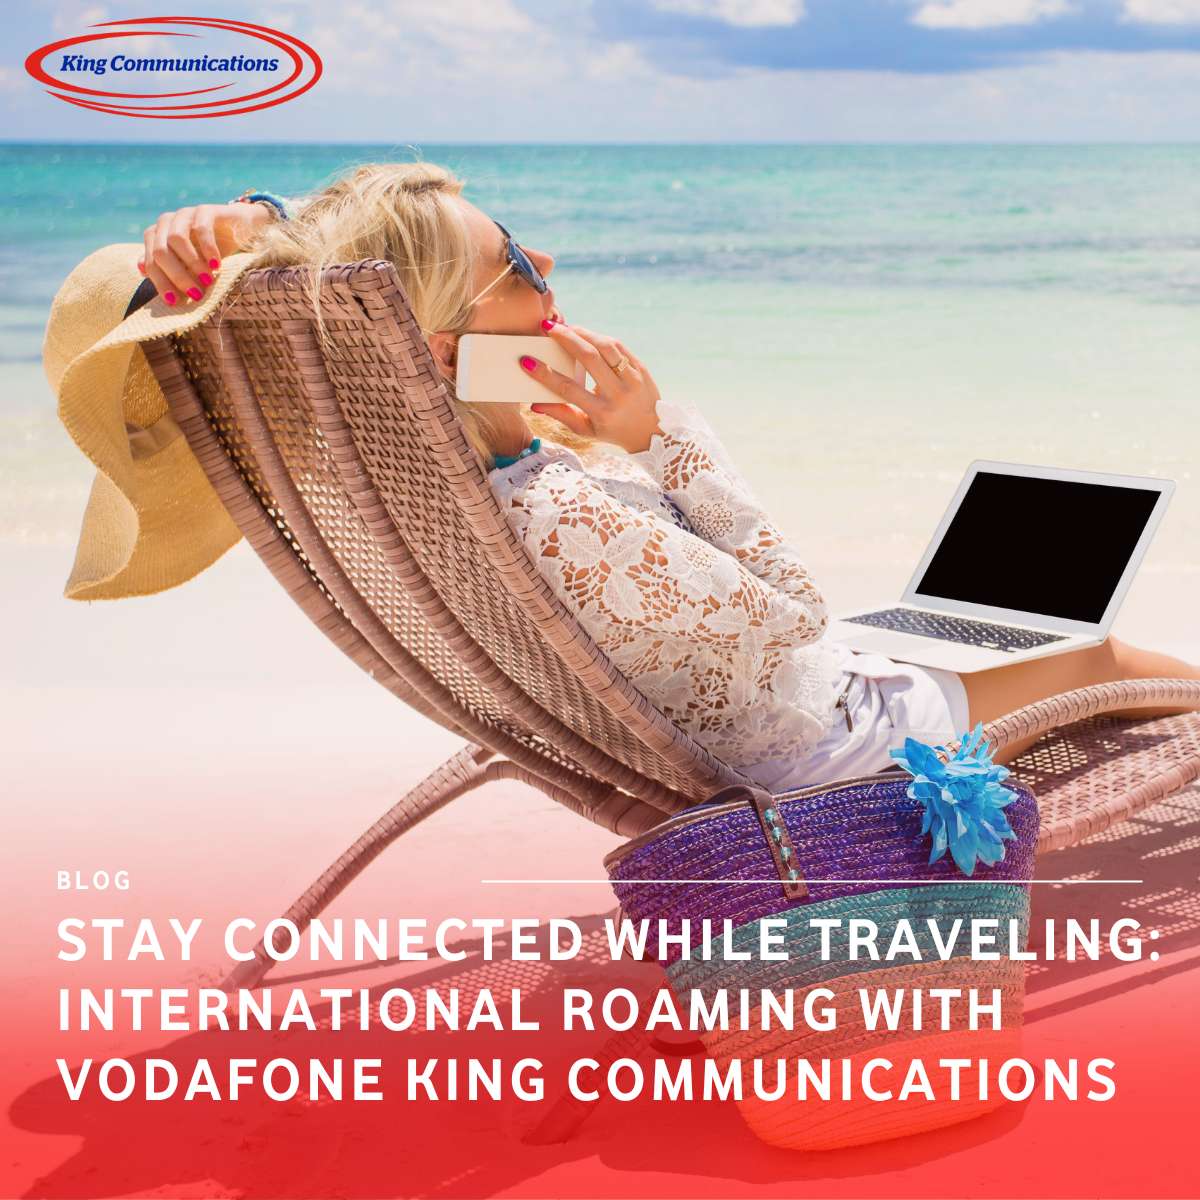 Stay Connected While Traveling International Roaming with Vodafone King Communications